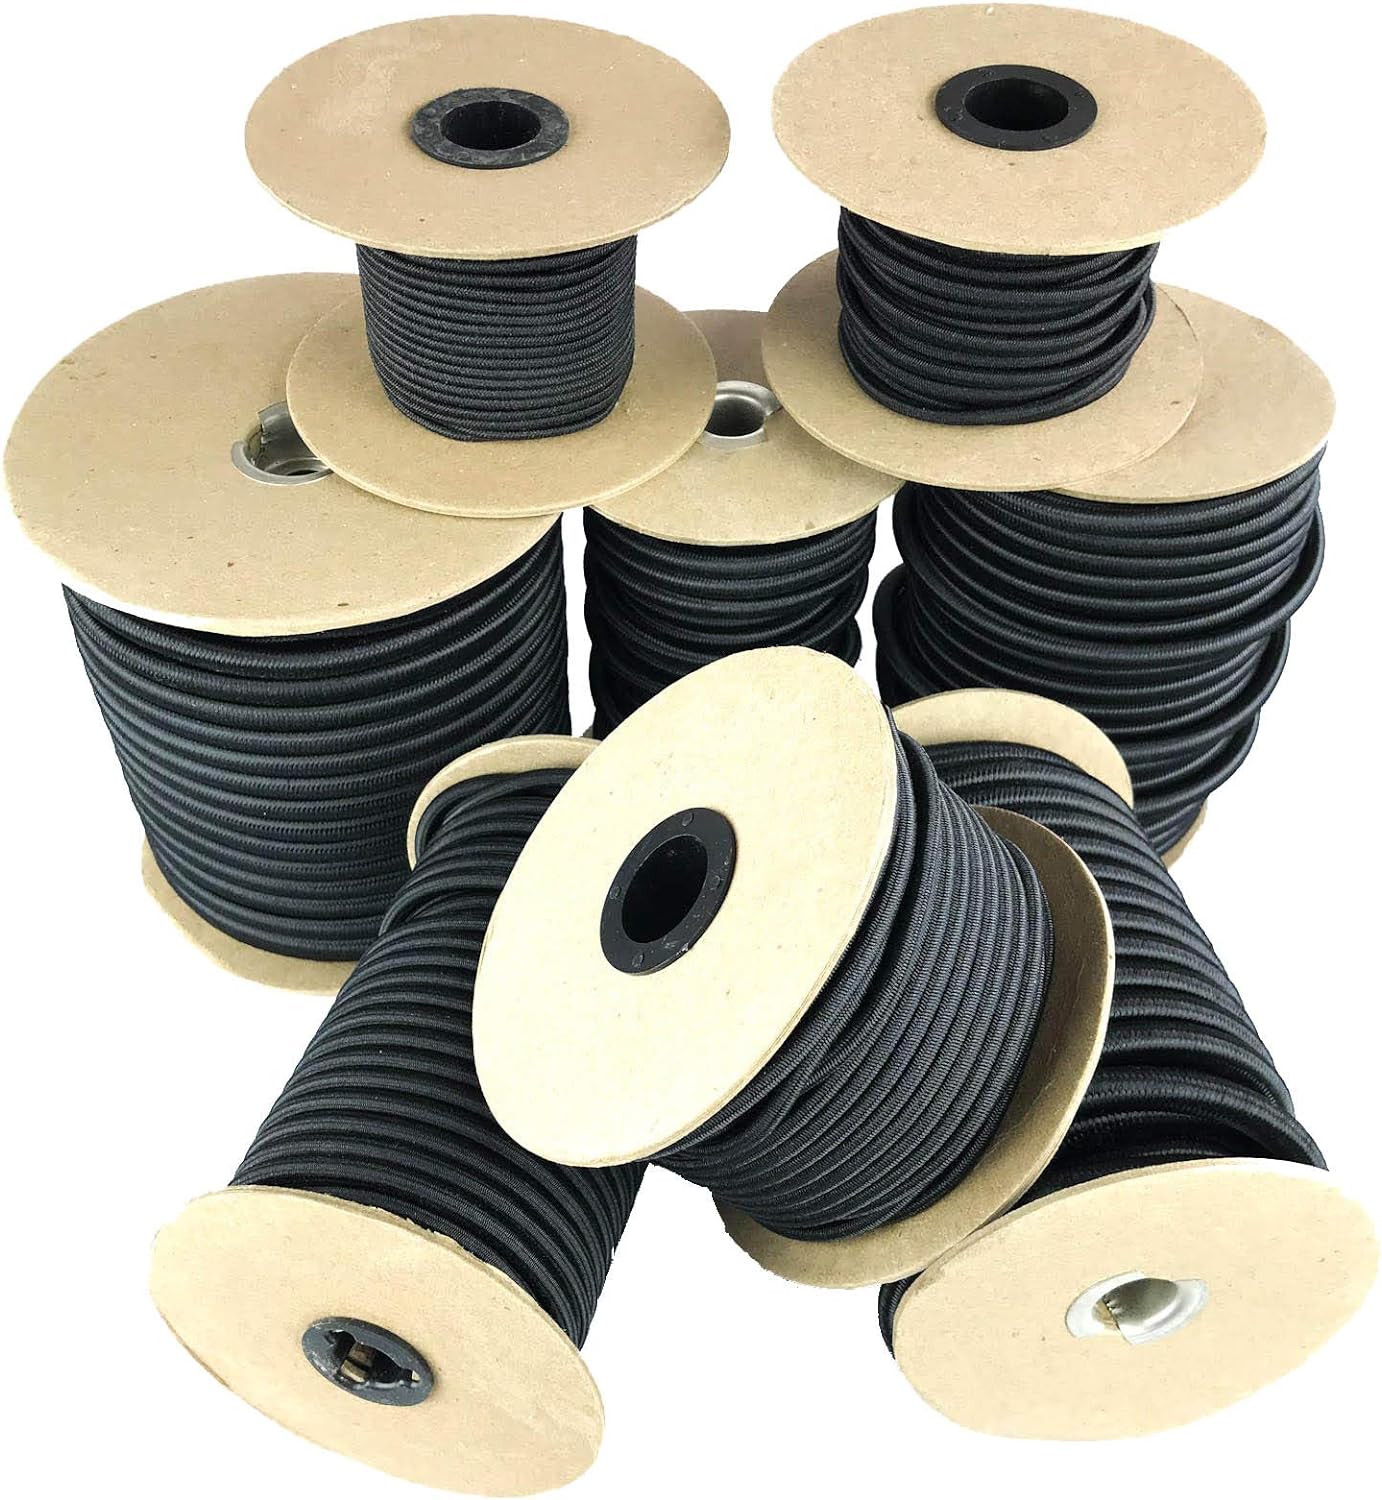 Thegan LLC Elastic Bungee Cord. 3/16", 3/8", 1/4", 5/16", 1/8". 50 and 100 Foot Spools. Weather and Abrasion Resi